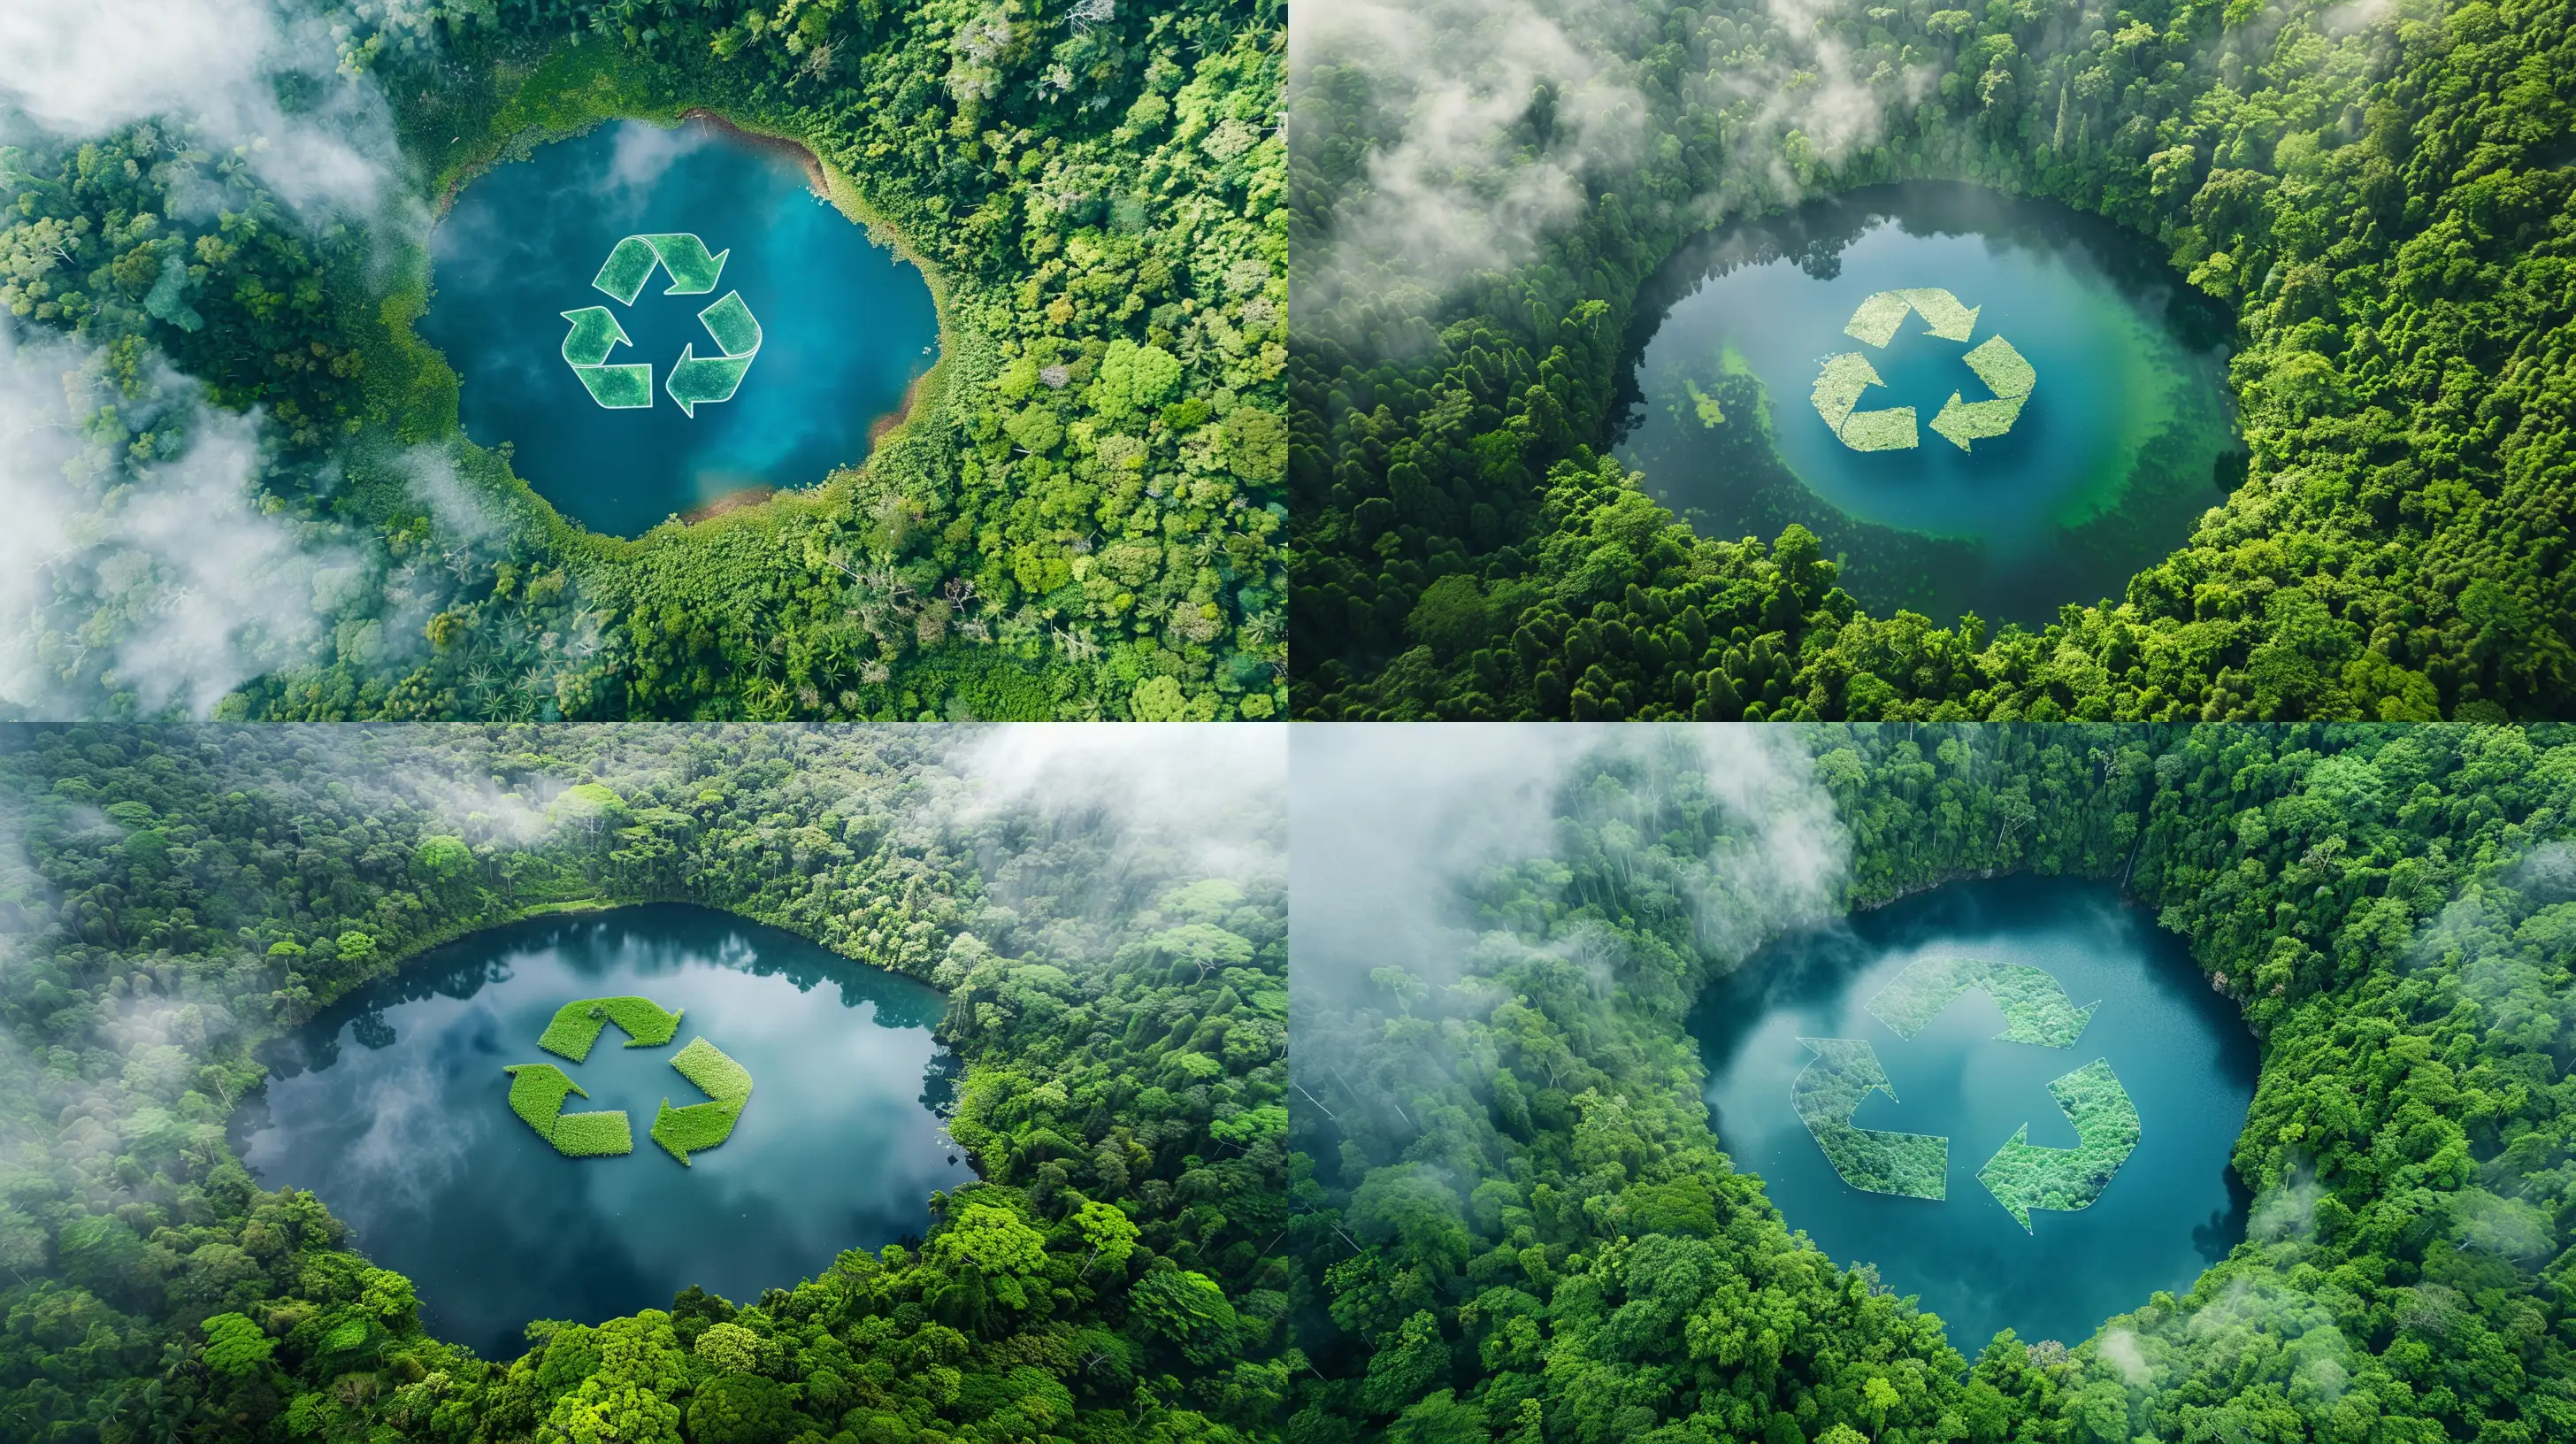 Create a stunning aerial view of a lush green forest with a large, clear lake in the center forming the shape of a recycling symbol. The image should capture the contrast between the dense, vibrant greenery and the crisp blue waters of the lake. Mist or clouds should be drifting around the edges of the forest, adding a mystical quality to the scene. The focus should be on the environmental theme, symbolizing sustainability and nature conservation, with the recycling symbol cleverly integrated using the natural landscape --ar 16:9